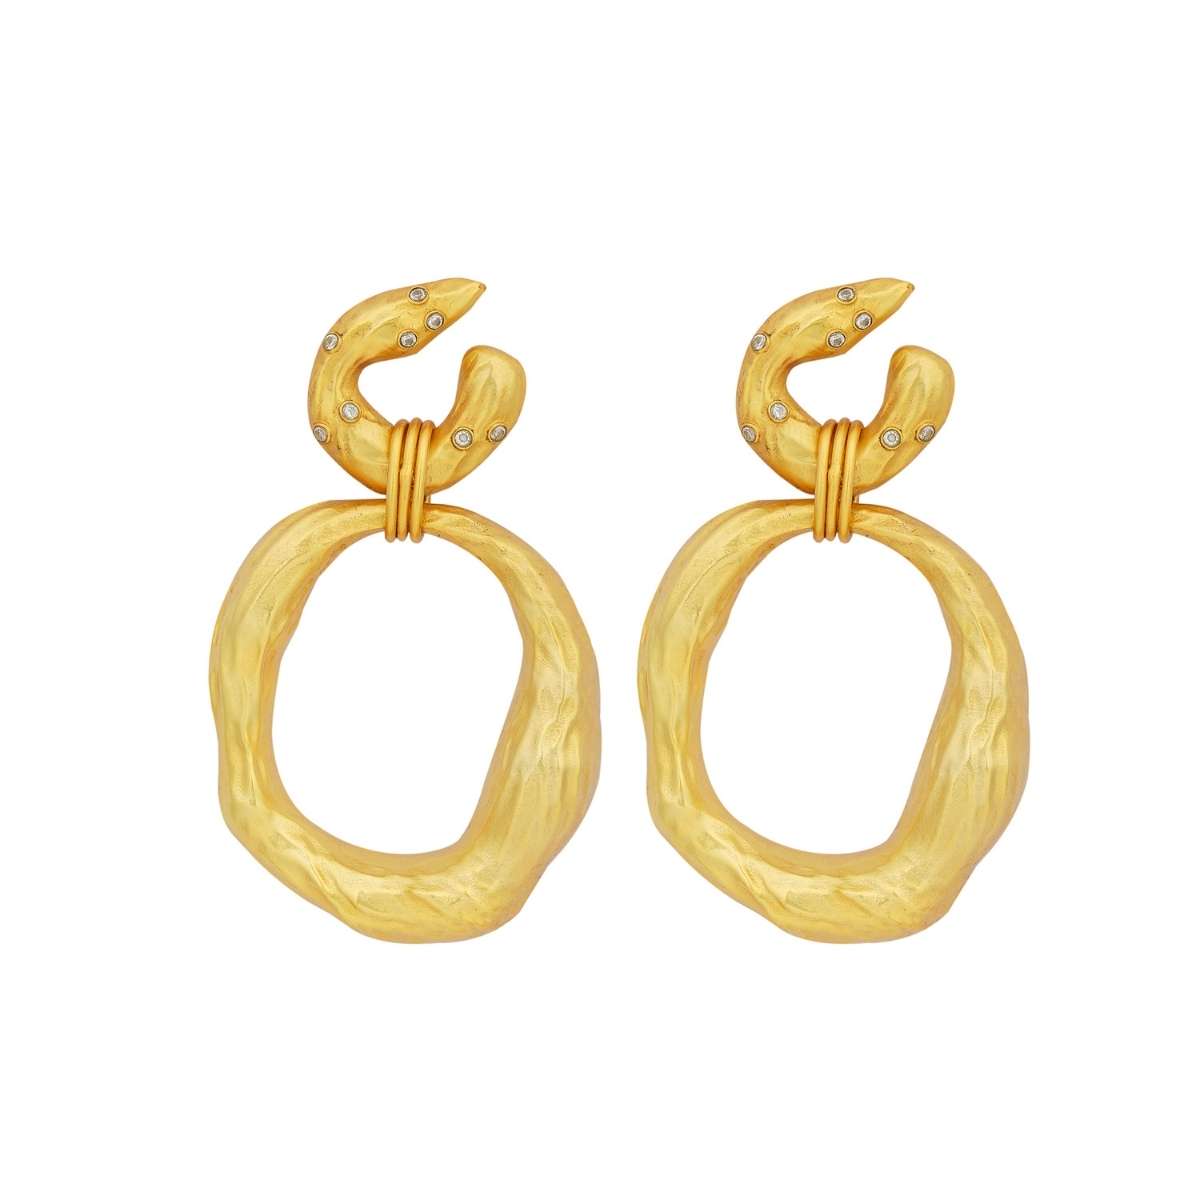 Total Fashion Gold Metal Double Ring with Beads Loop Bali Earrings for  Girls : Amazon.in: Fashion